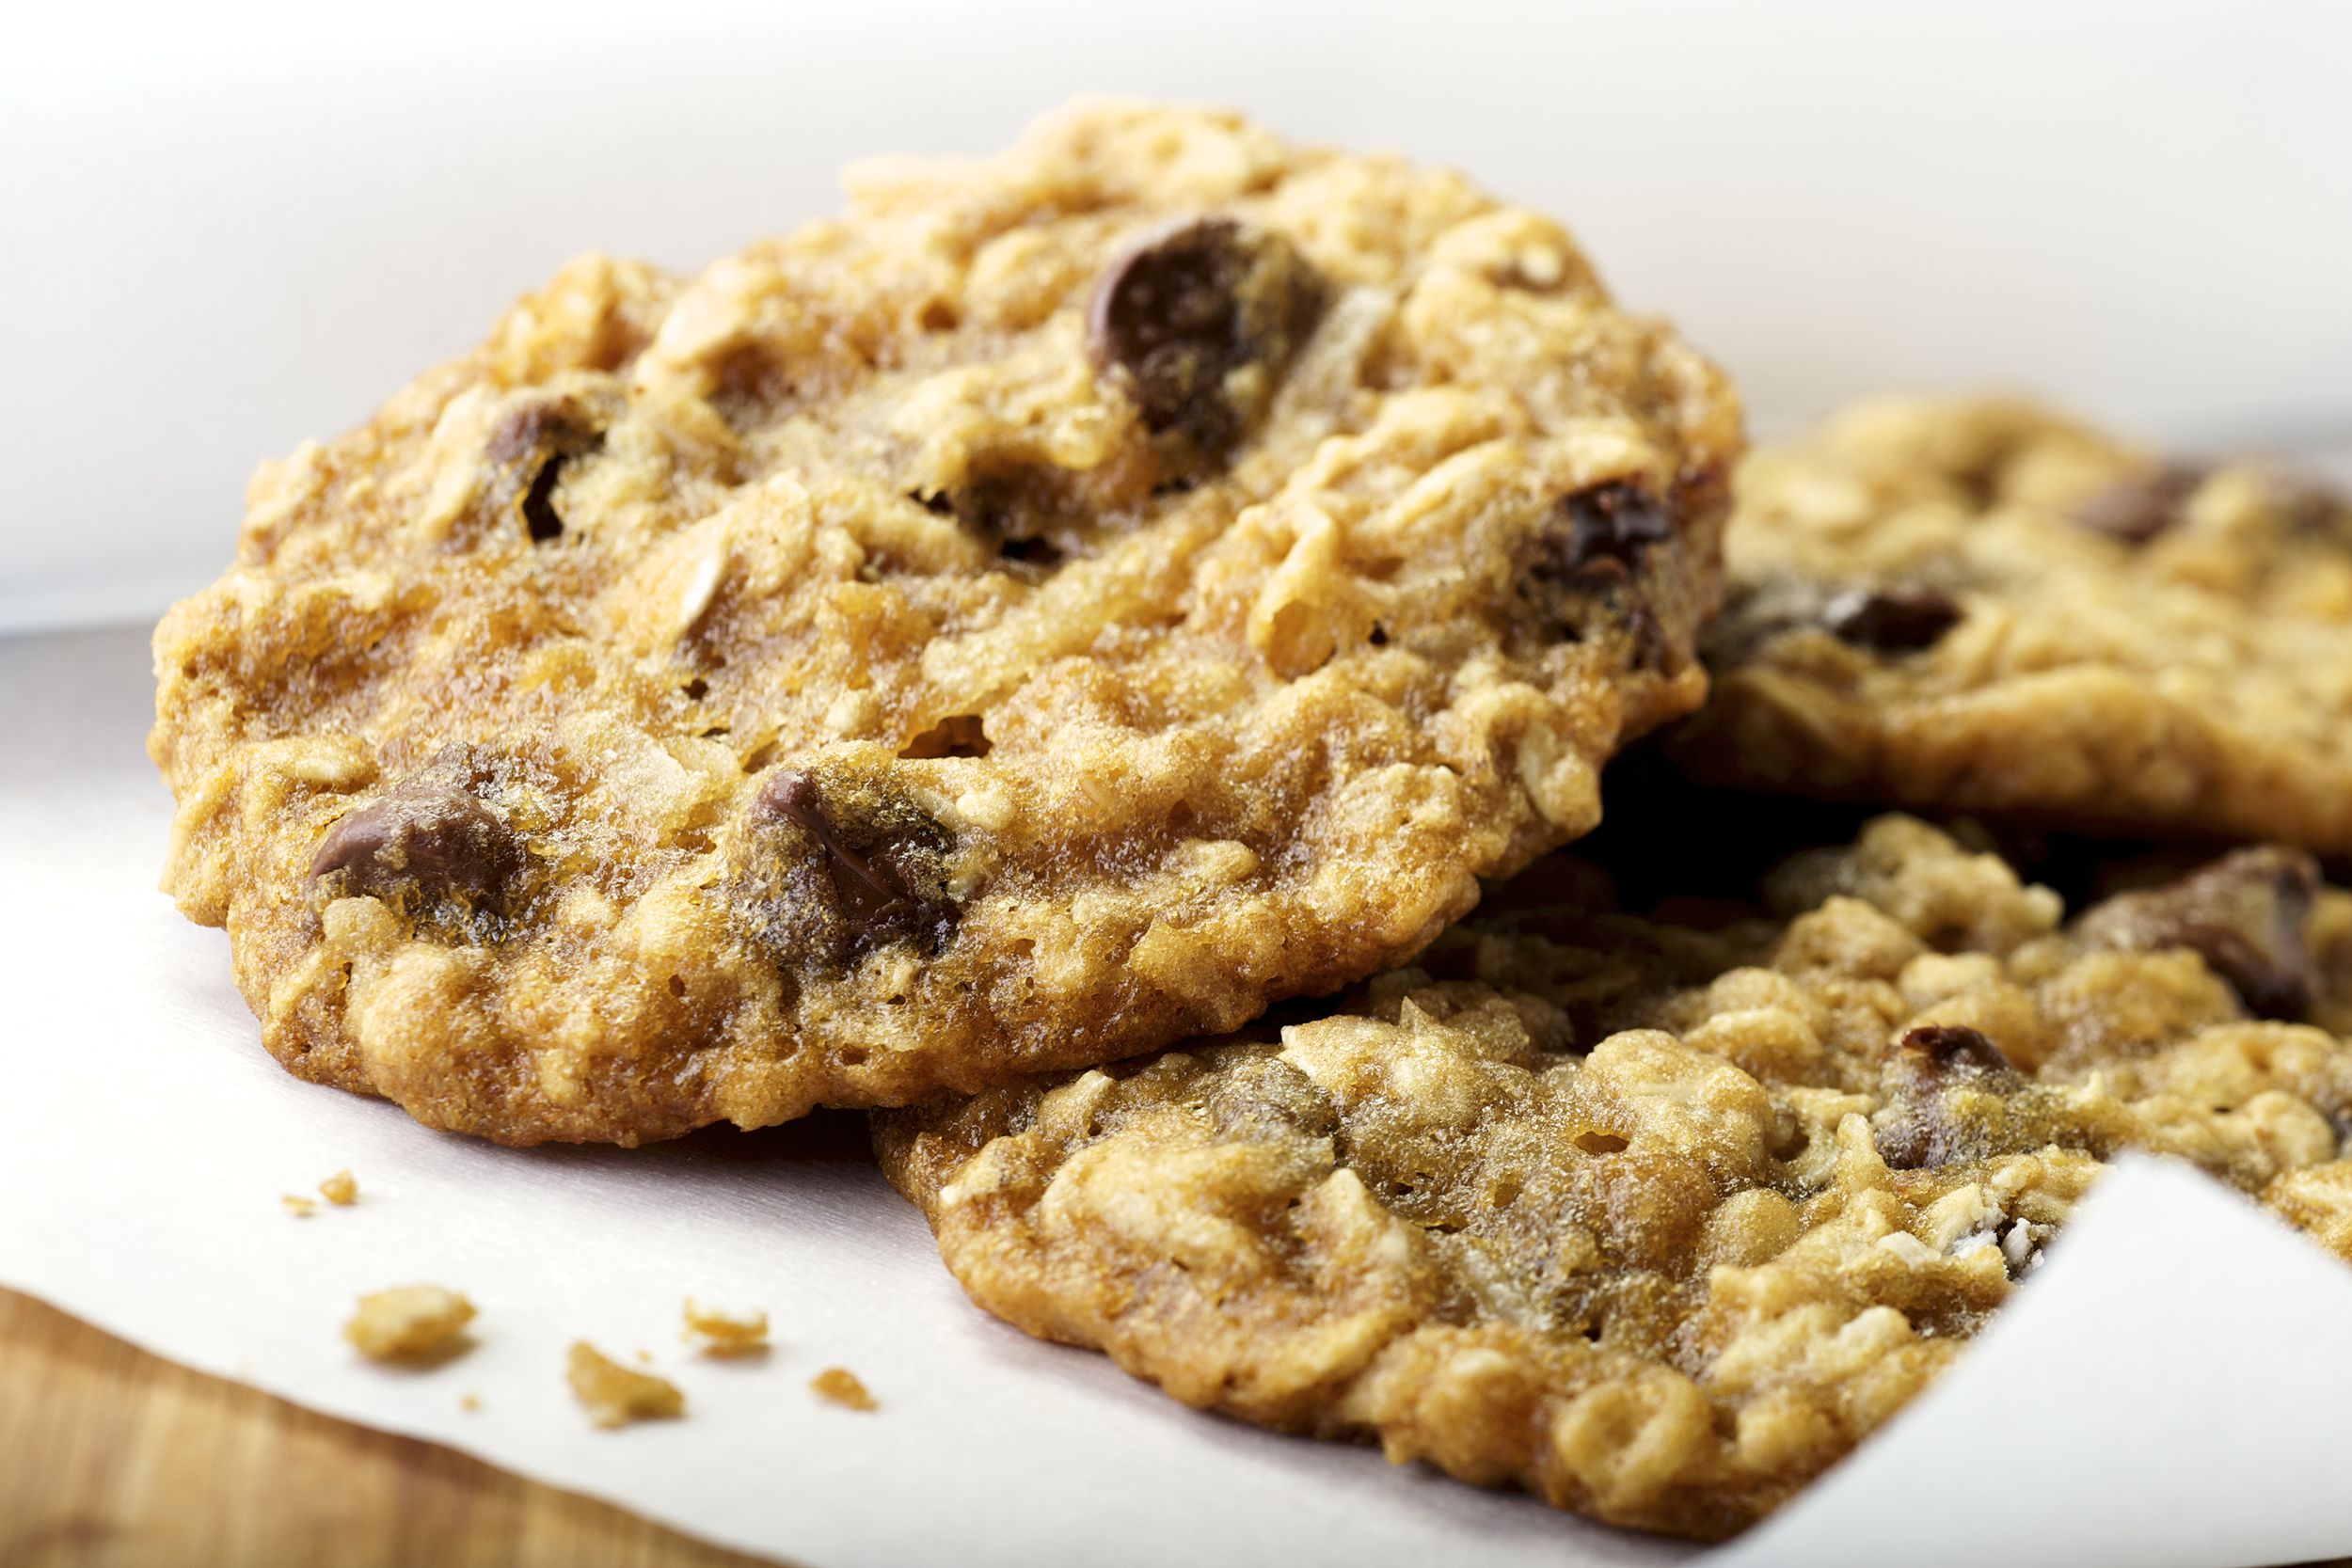 <div class="rich-text"><p>A few <a href="https://blog.cheapism.com/amazing-chocolate-chip-cookie-recipes--14154/">homemade cookies</a> stashed in a bag will come in handy when a dessert craving hits at the airport coffee shop pastry case. Packed in a zip-top bag, they will stay fresh for up to a few days (although they are likely to run out before that).</p></div>